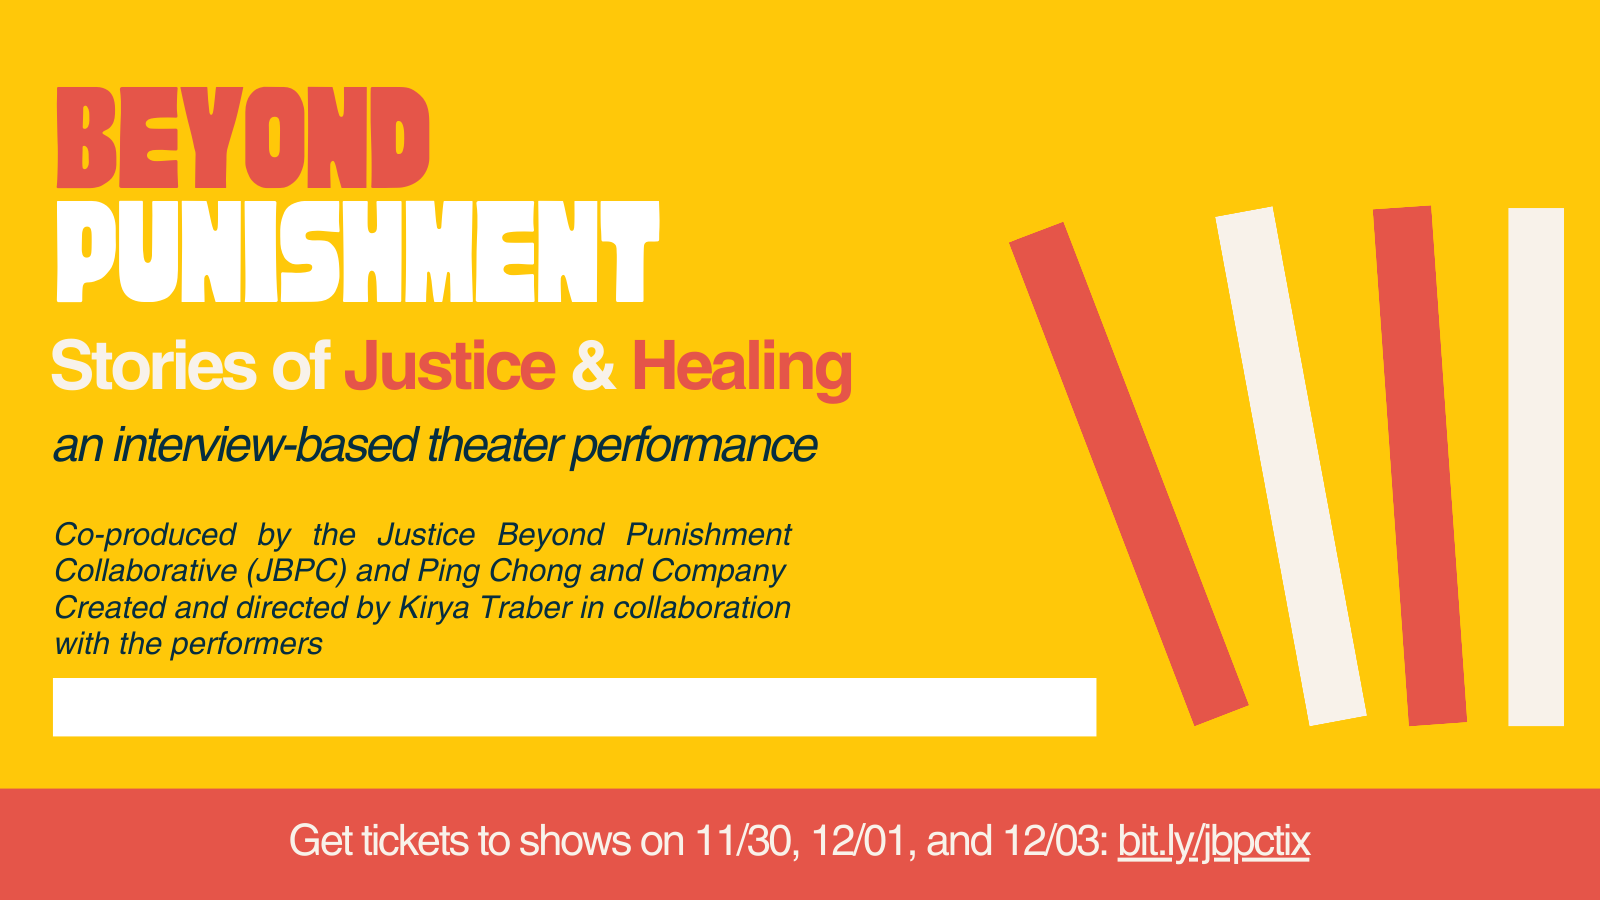 Yellow background with red, white, and black text. Beyond Punishment. Stories of Justice & Healing, an interview-based theater performance. Co-produced by the Justice Beyond Punishment Collaborative (JBPC) and Ping Chong and Company. Created and directed by Kirya Traber in collaboration with the performers. White text on red background: Get tickets to shows on 11/30, 12/01, and 12/03: bit.ly/jbpctix